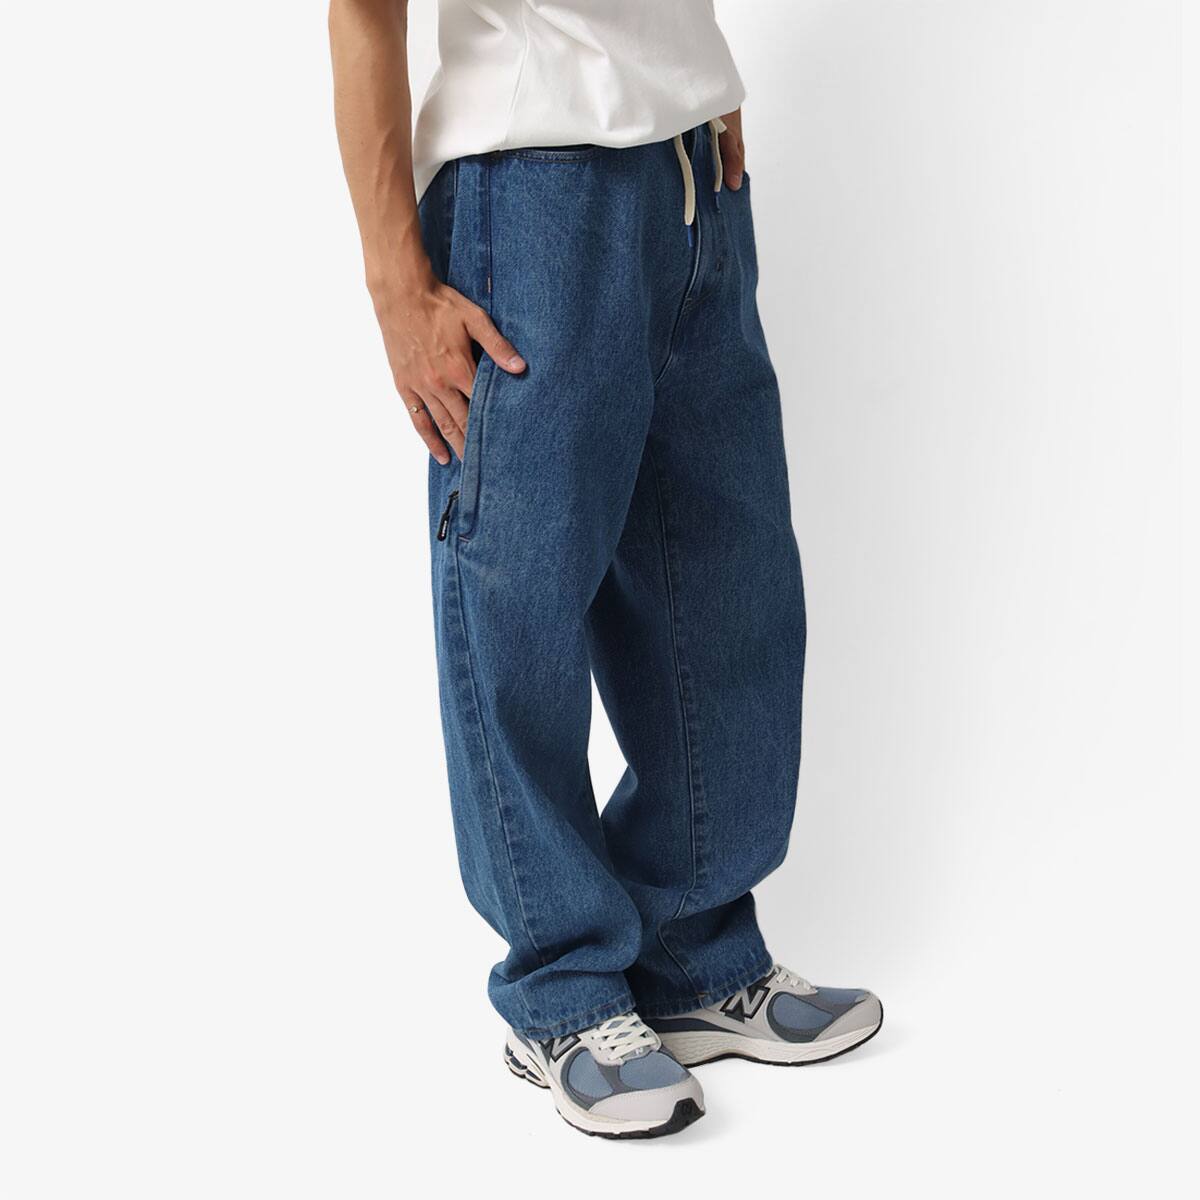 atmos Baggy Tapered Denim Pants BLUE 23FA-I